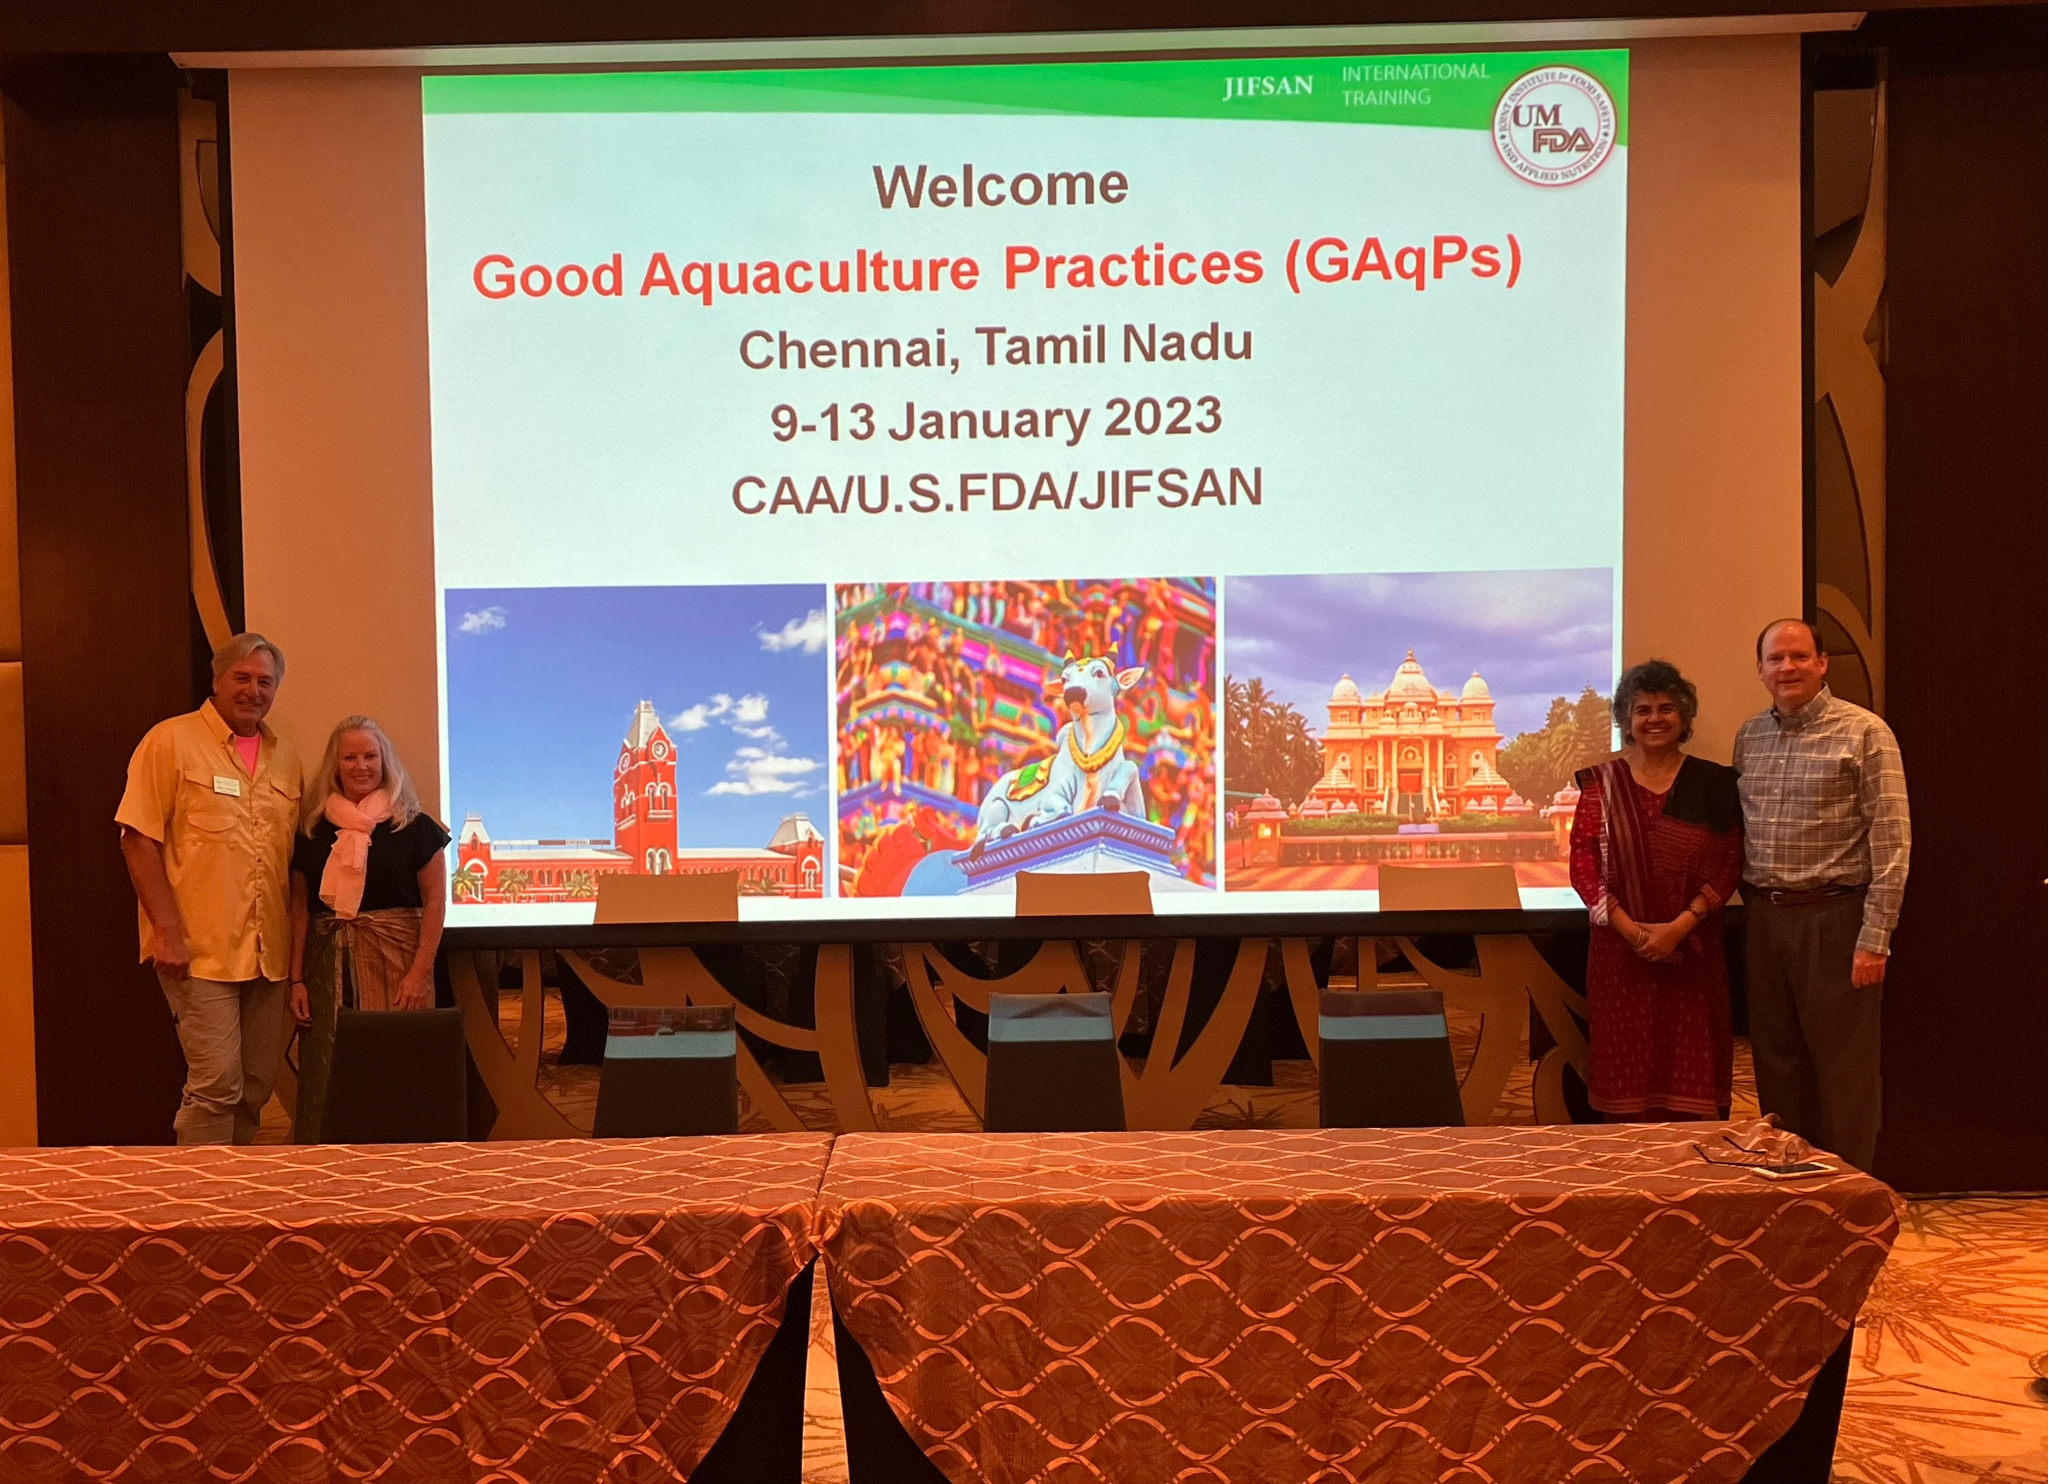 Four conference participants stand in front of a projected slide that reads 'Welcome; Good Aquacultural Practices (GAqP); Chennai, Tamil Nadu' with images of temples and other sites around the city of Chennai.